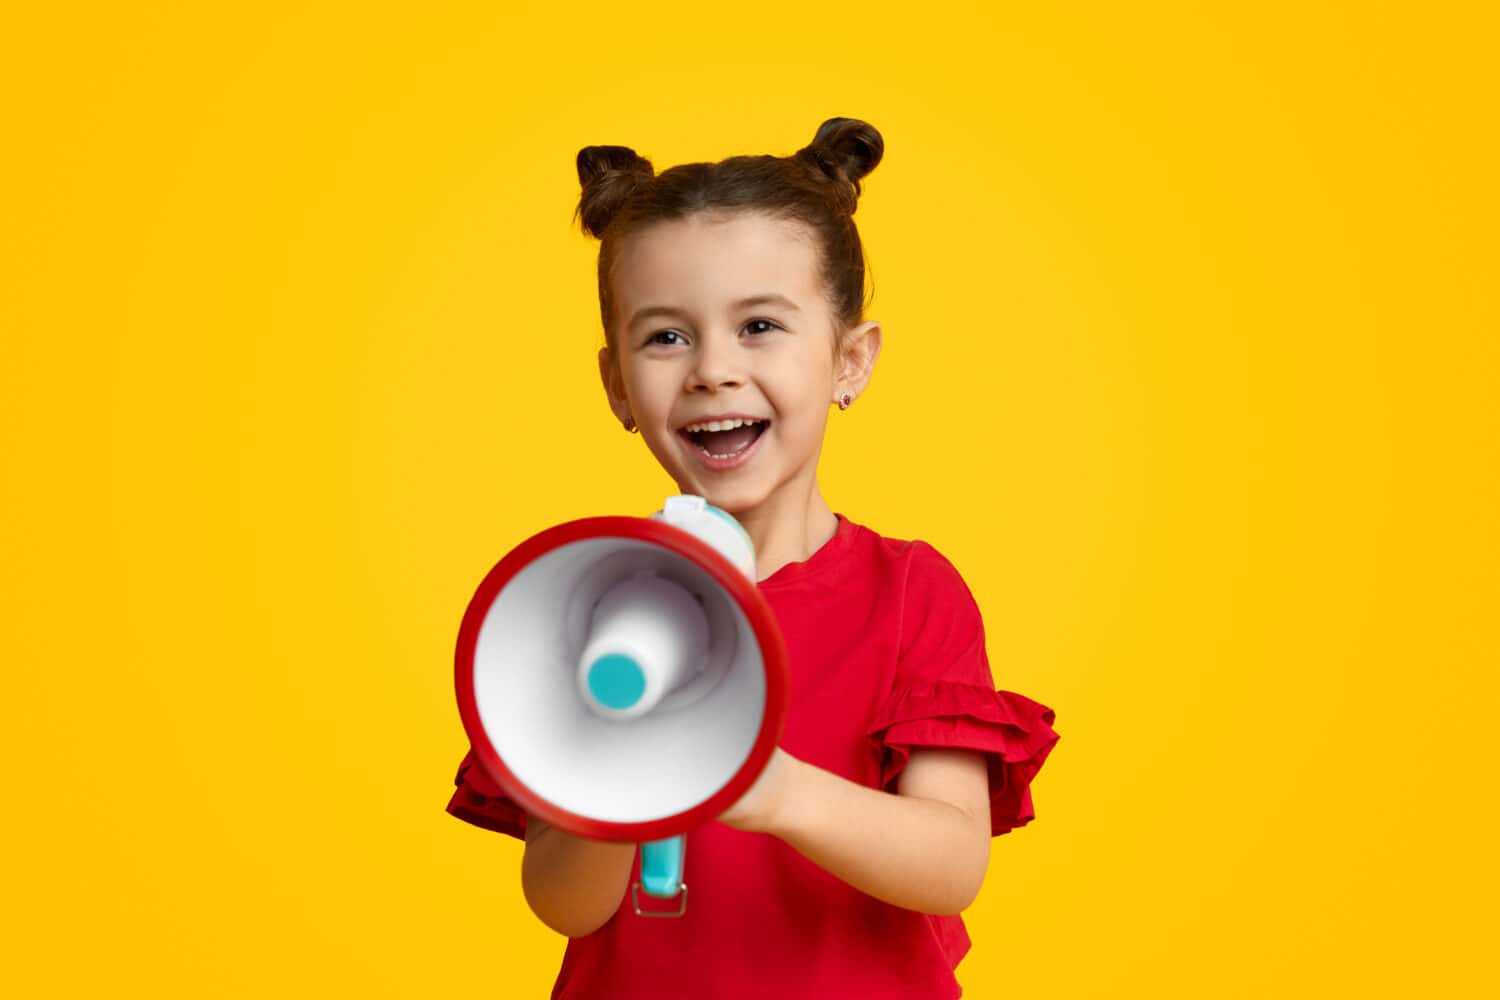 Excited kid leader speaking in megaphone and smiling while standing against yellow background. Young leader concept